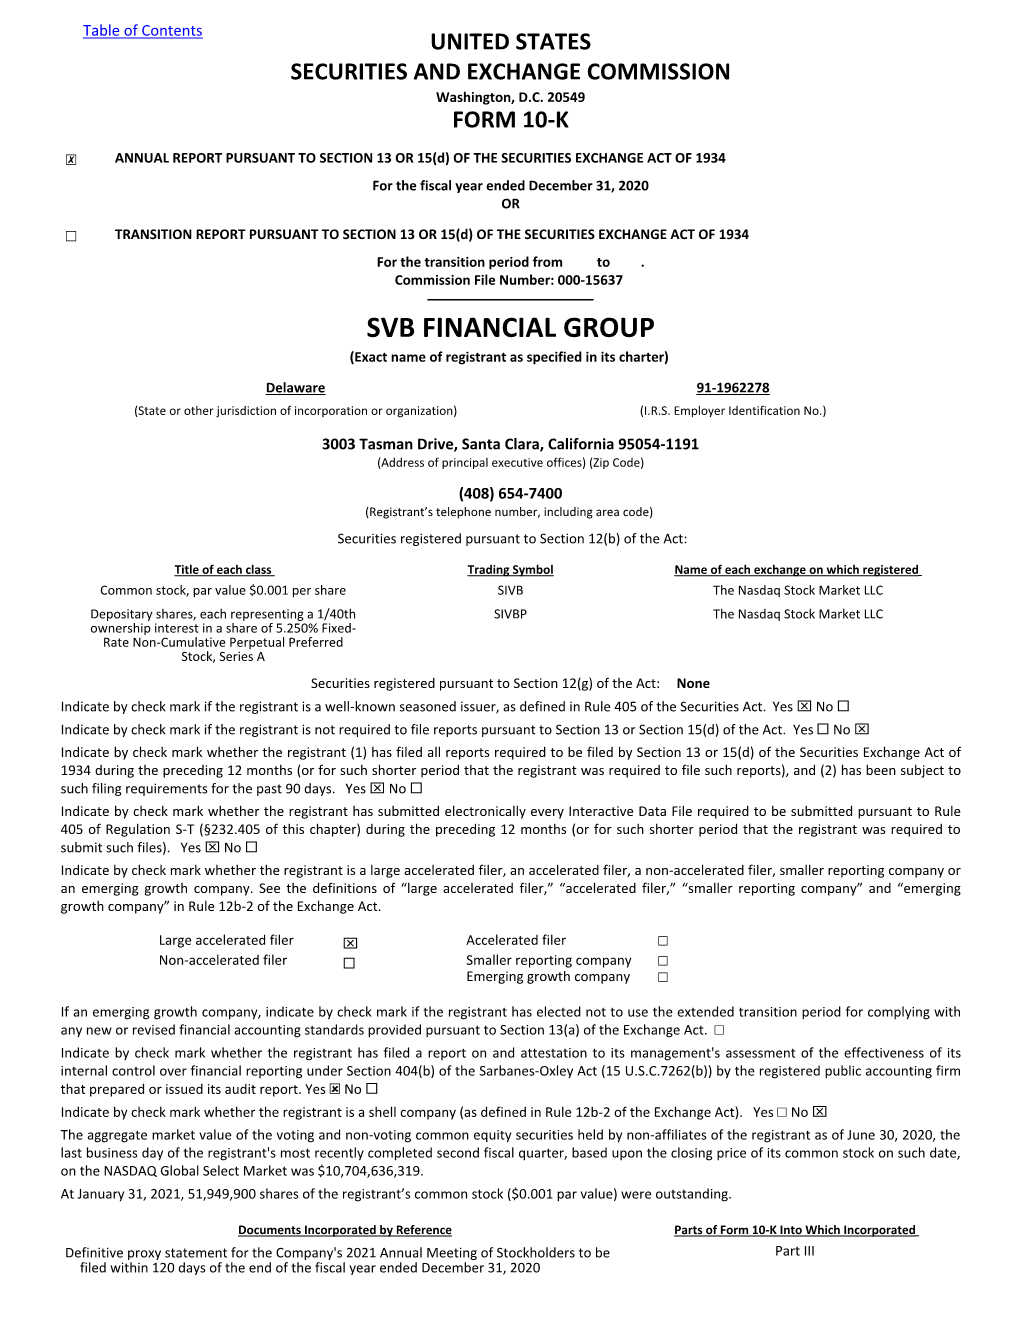 SVB FINANCIAL GROUP (Exact Name of Registrant As Specified in Its Charter)